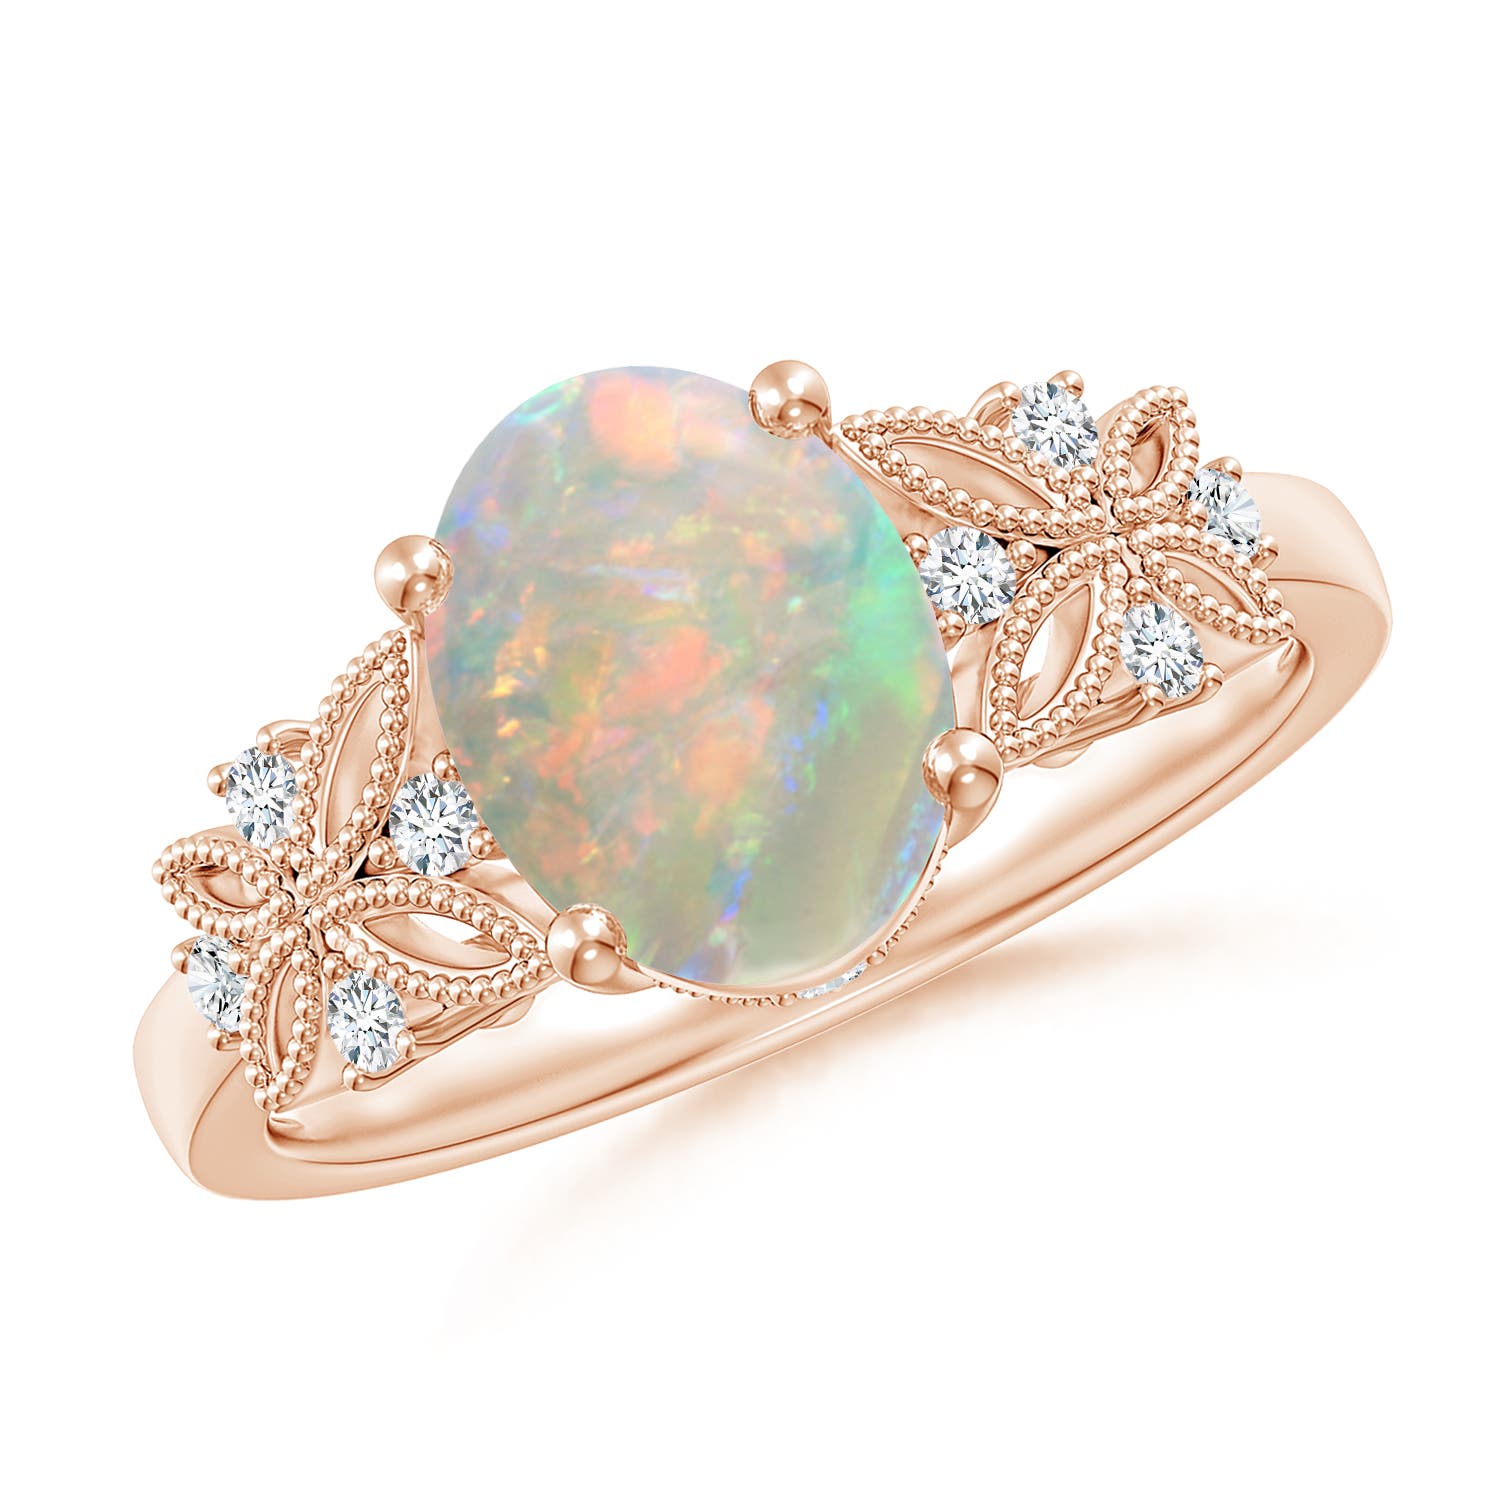 Australian Opal Ring, Designer Fire Opal Ring, Fire Opal Engagement Ring,  Propose Ring for Women, Unique Stone Ring for Wife, Birthday Gifts - Etsy  Canada | Engagement rings opal, Opal engagement ring